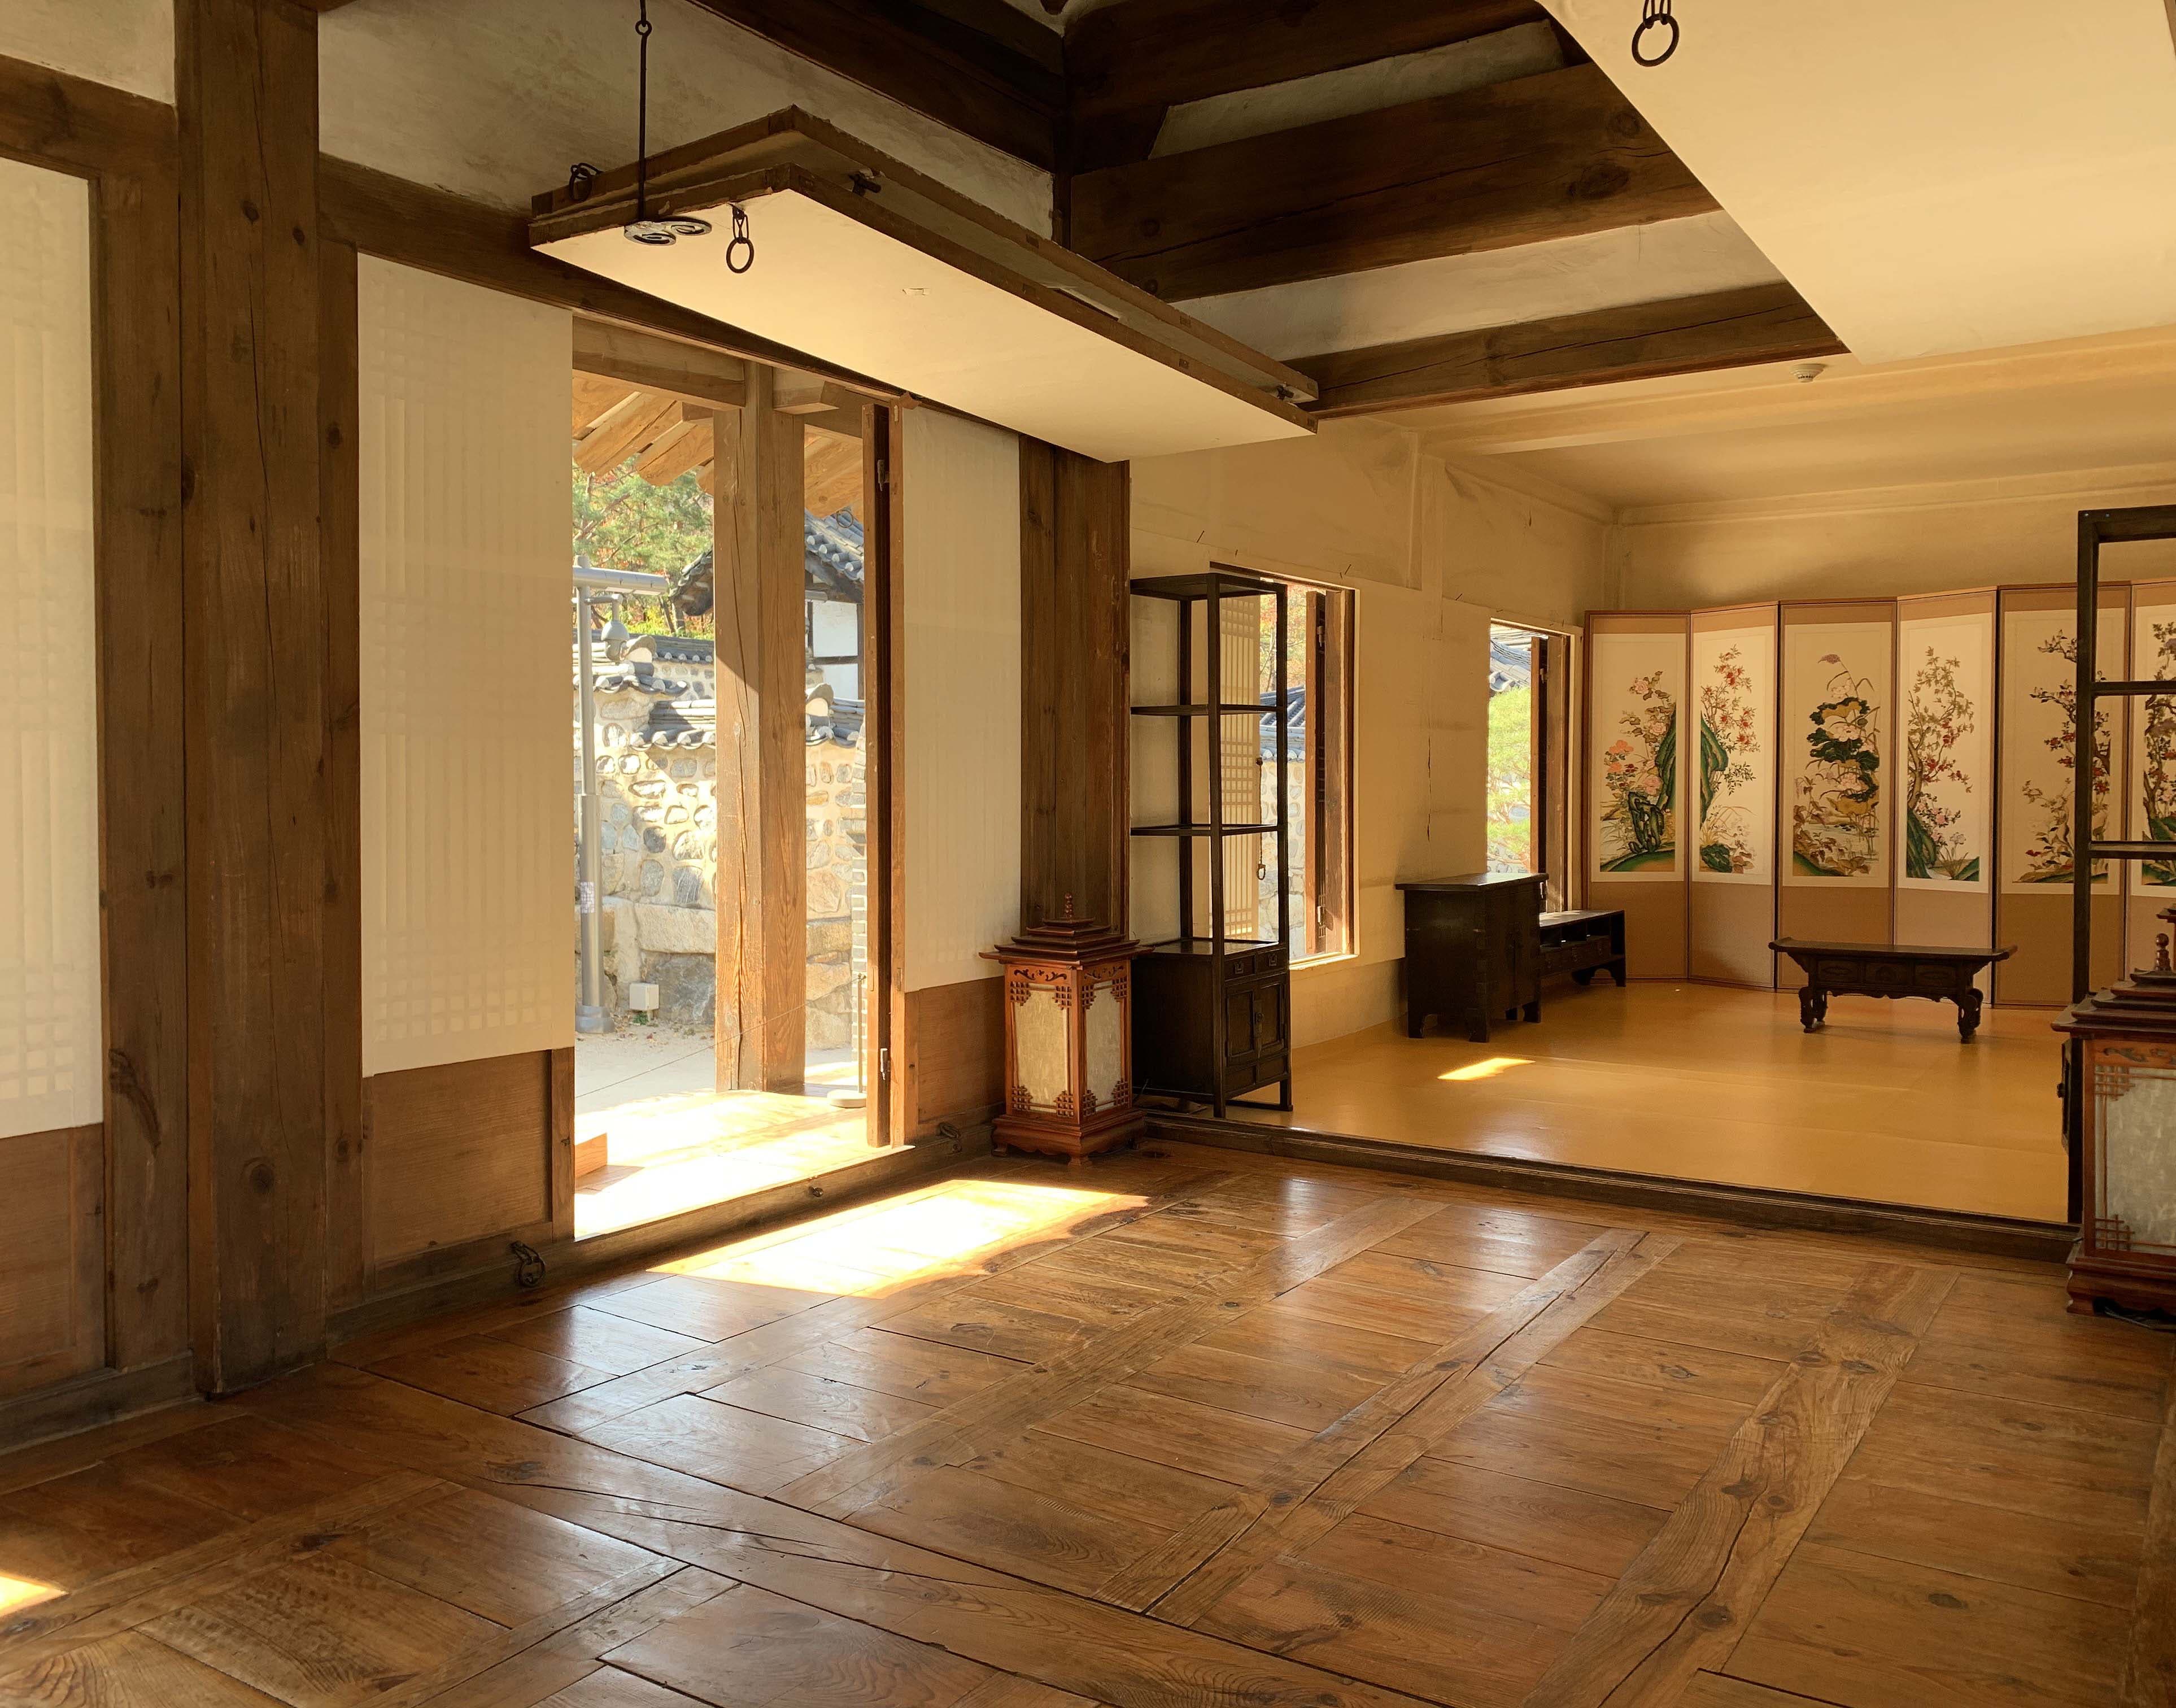 Namsangol Hanok Village3 : Interior of a sunny and spacious traditional house with a folding screen on one wall